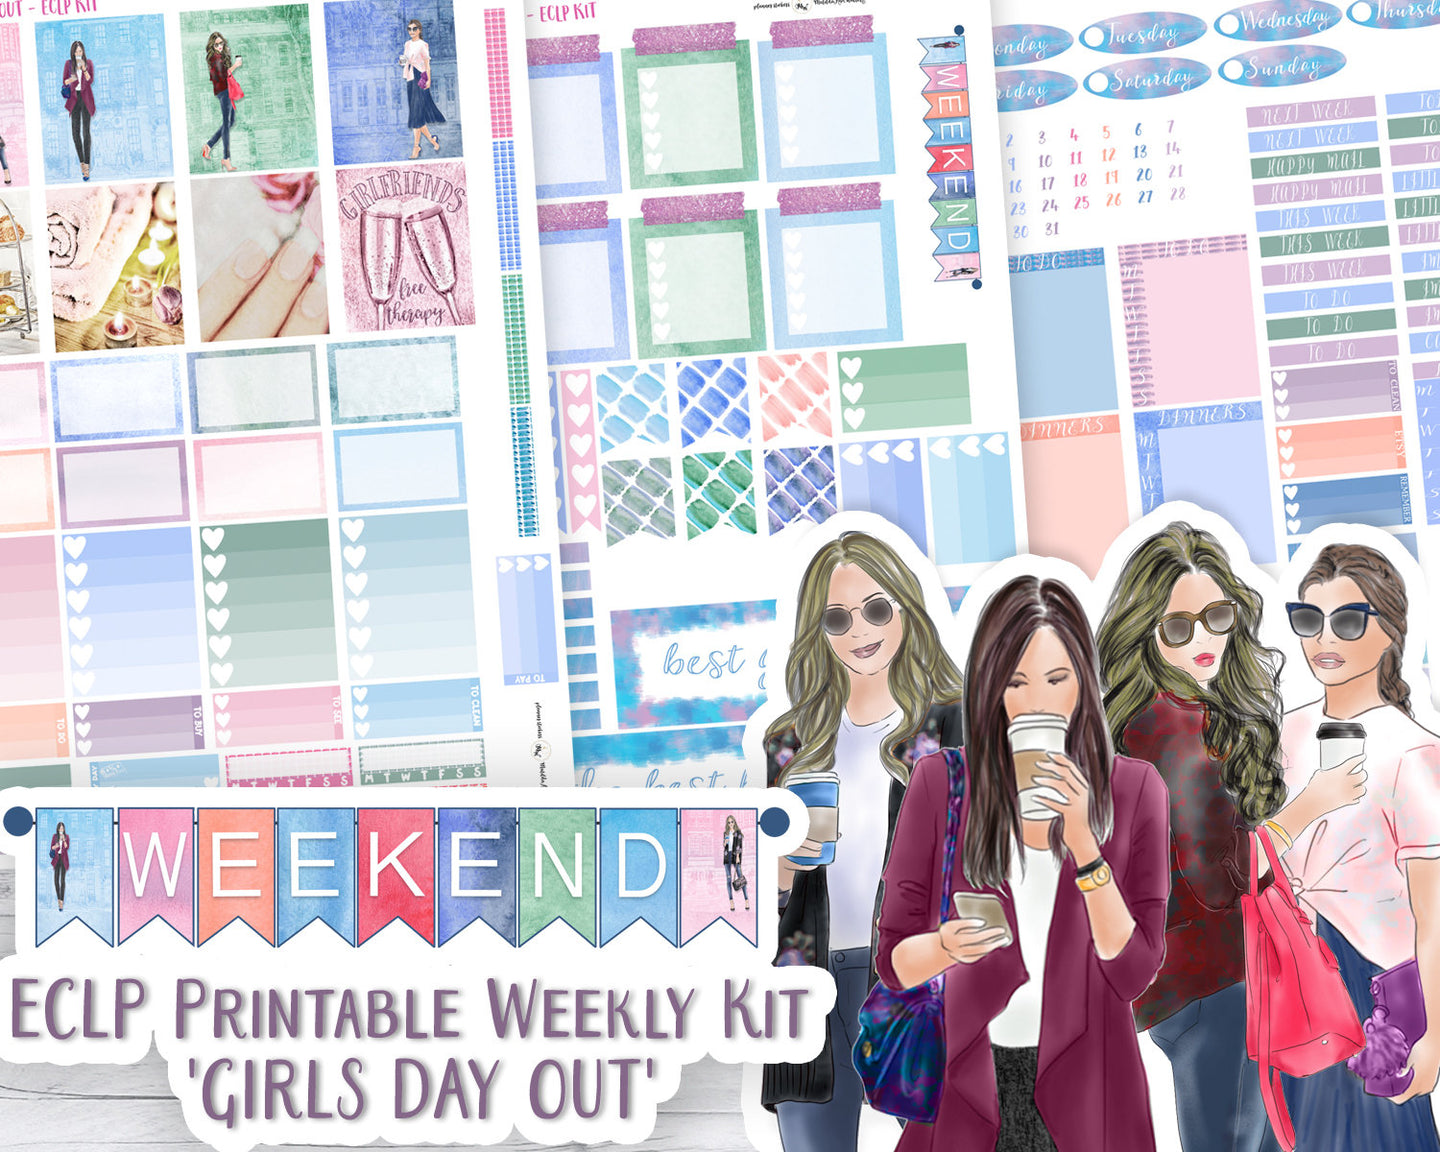 Fashion Girls PRINTABLE Sticker Kit designed to fit ECLP. Suitable for Silhouette Cameo etc